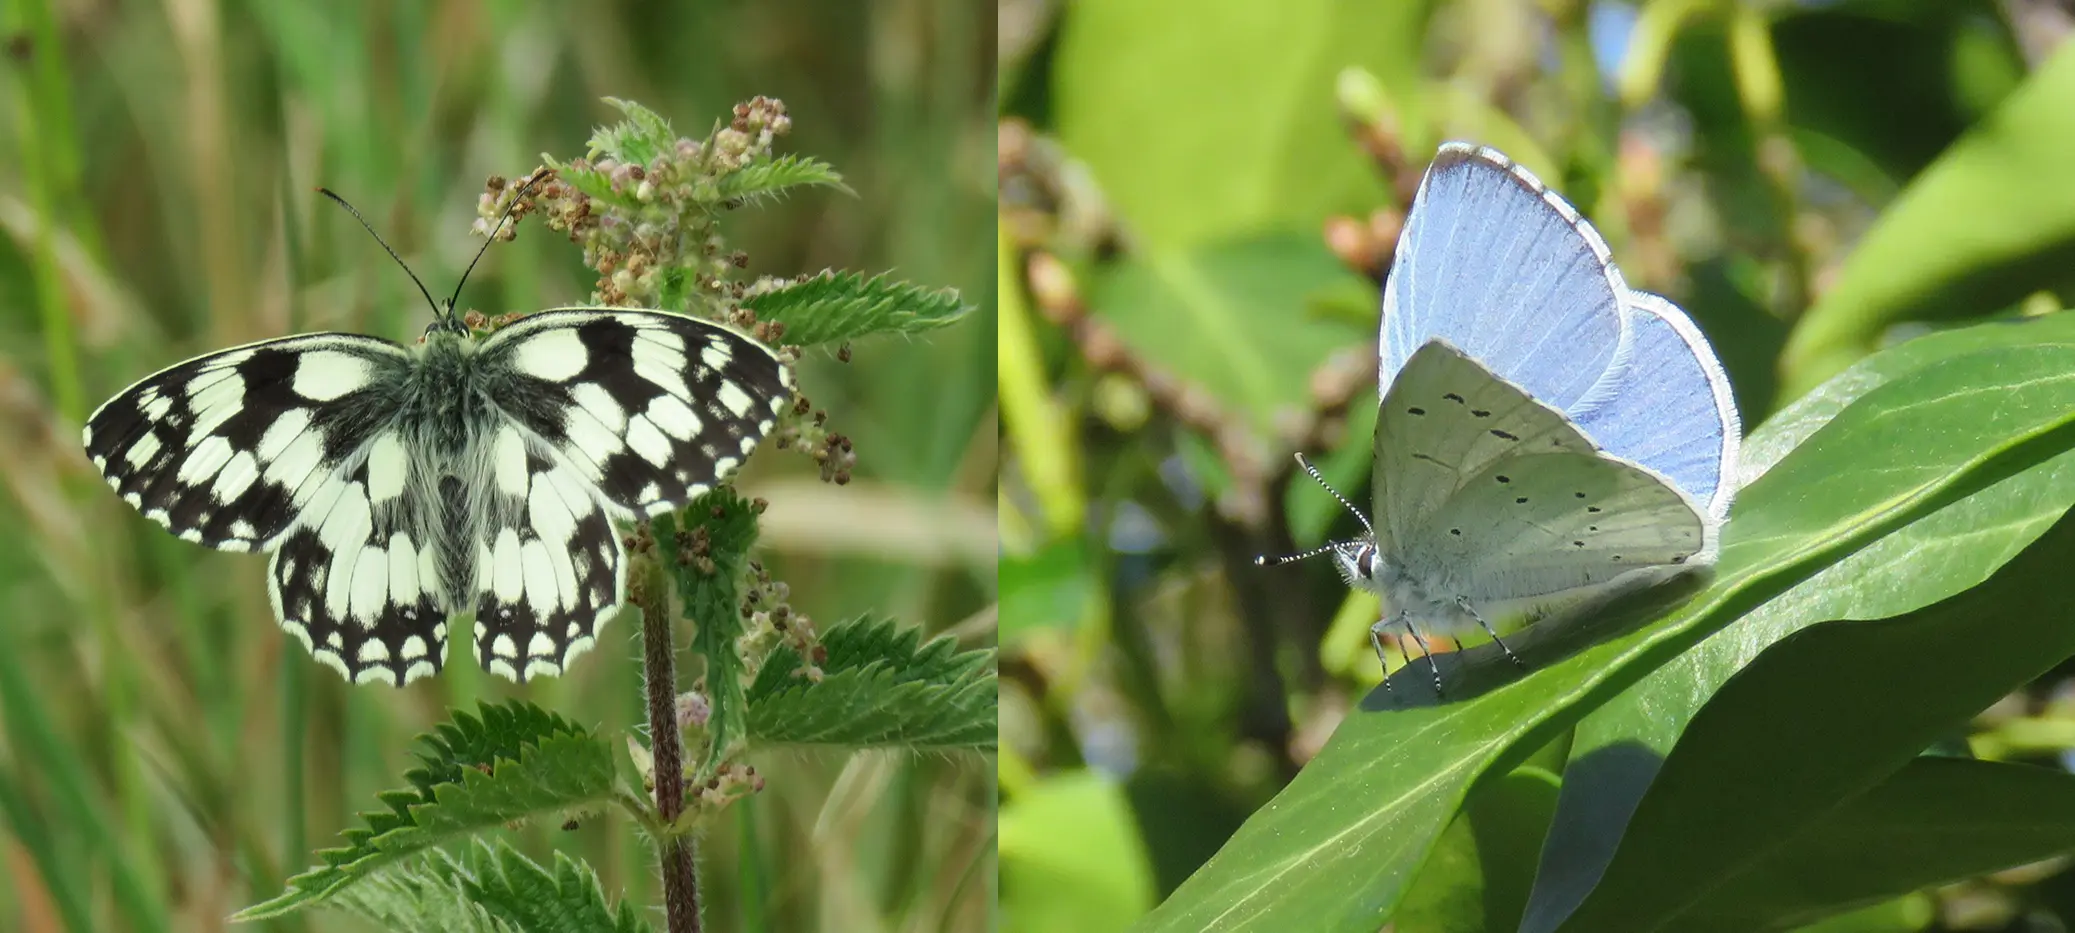 Marbled White butterfly and Holly Blue butterfly have been seen at Warwick Spinney. Photo credit: Benson Nature Group